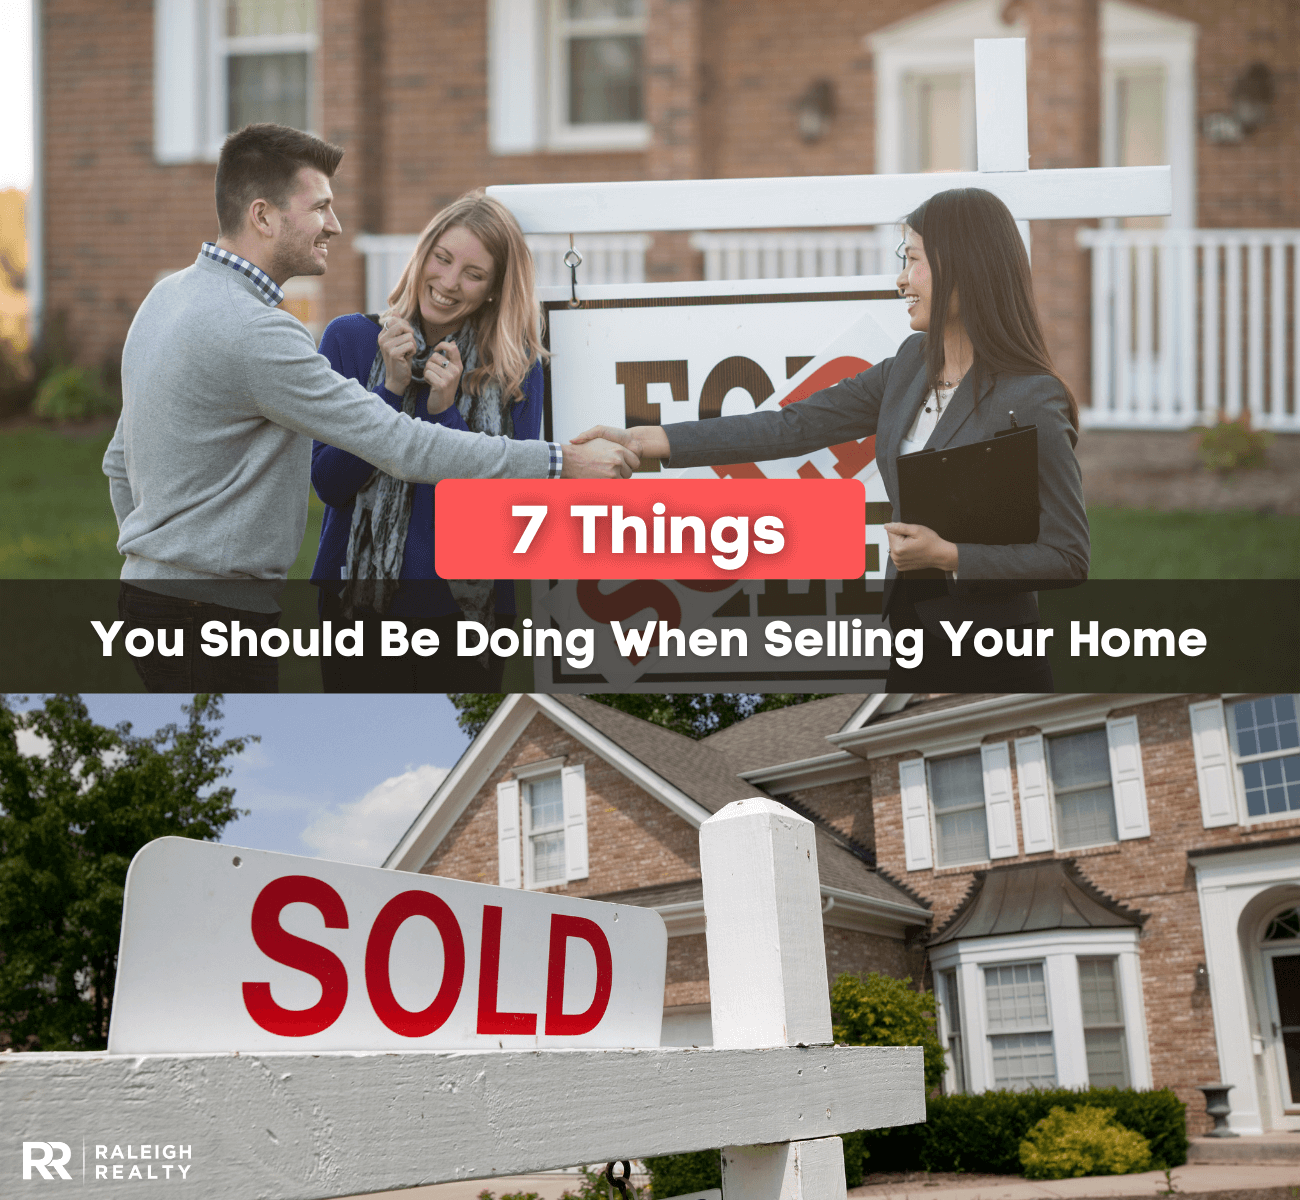 7 Things You Should Be Doing When Selling Your Home